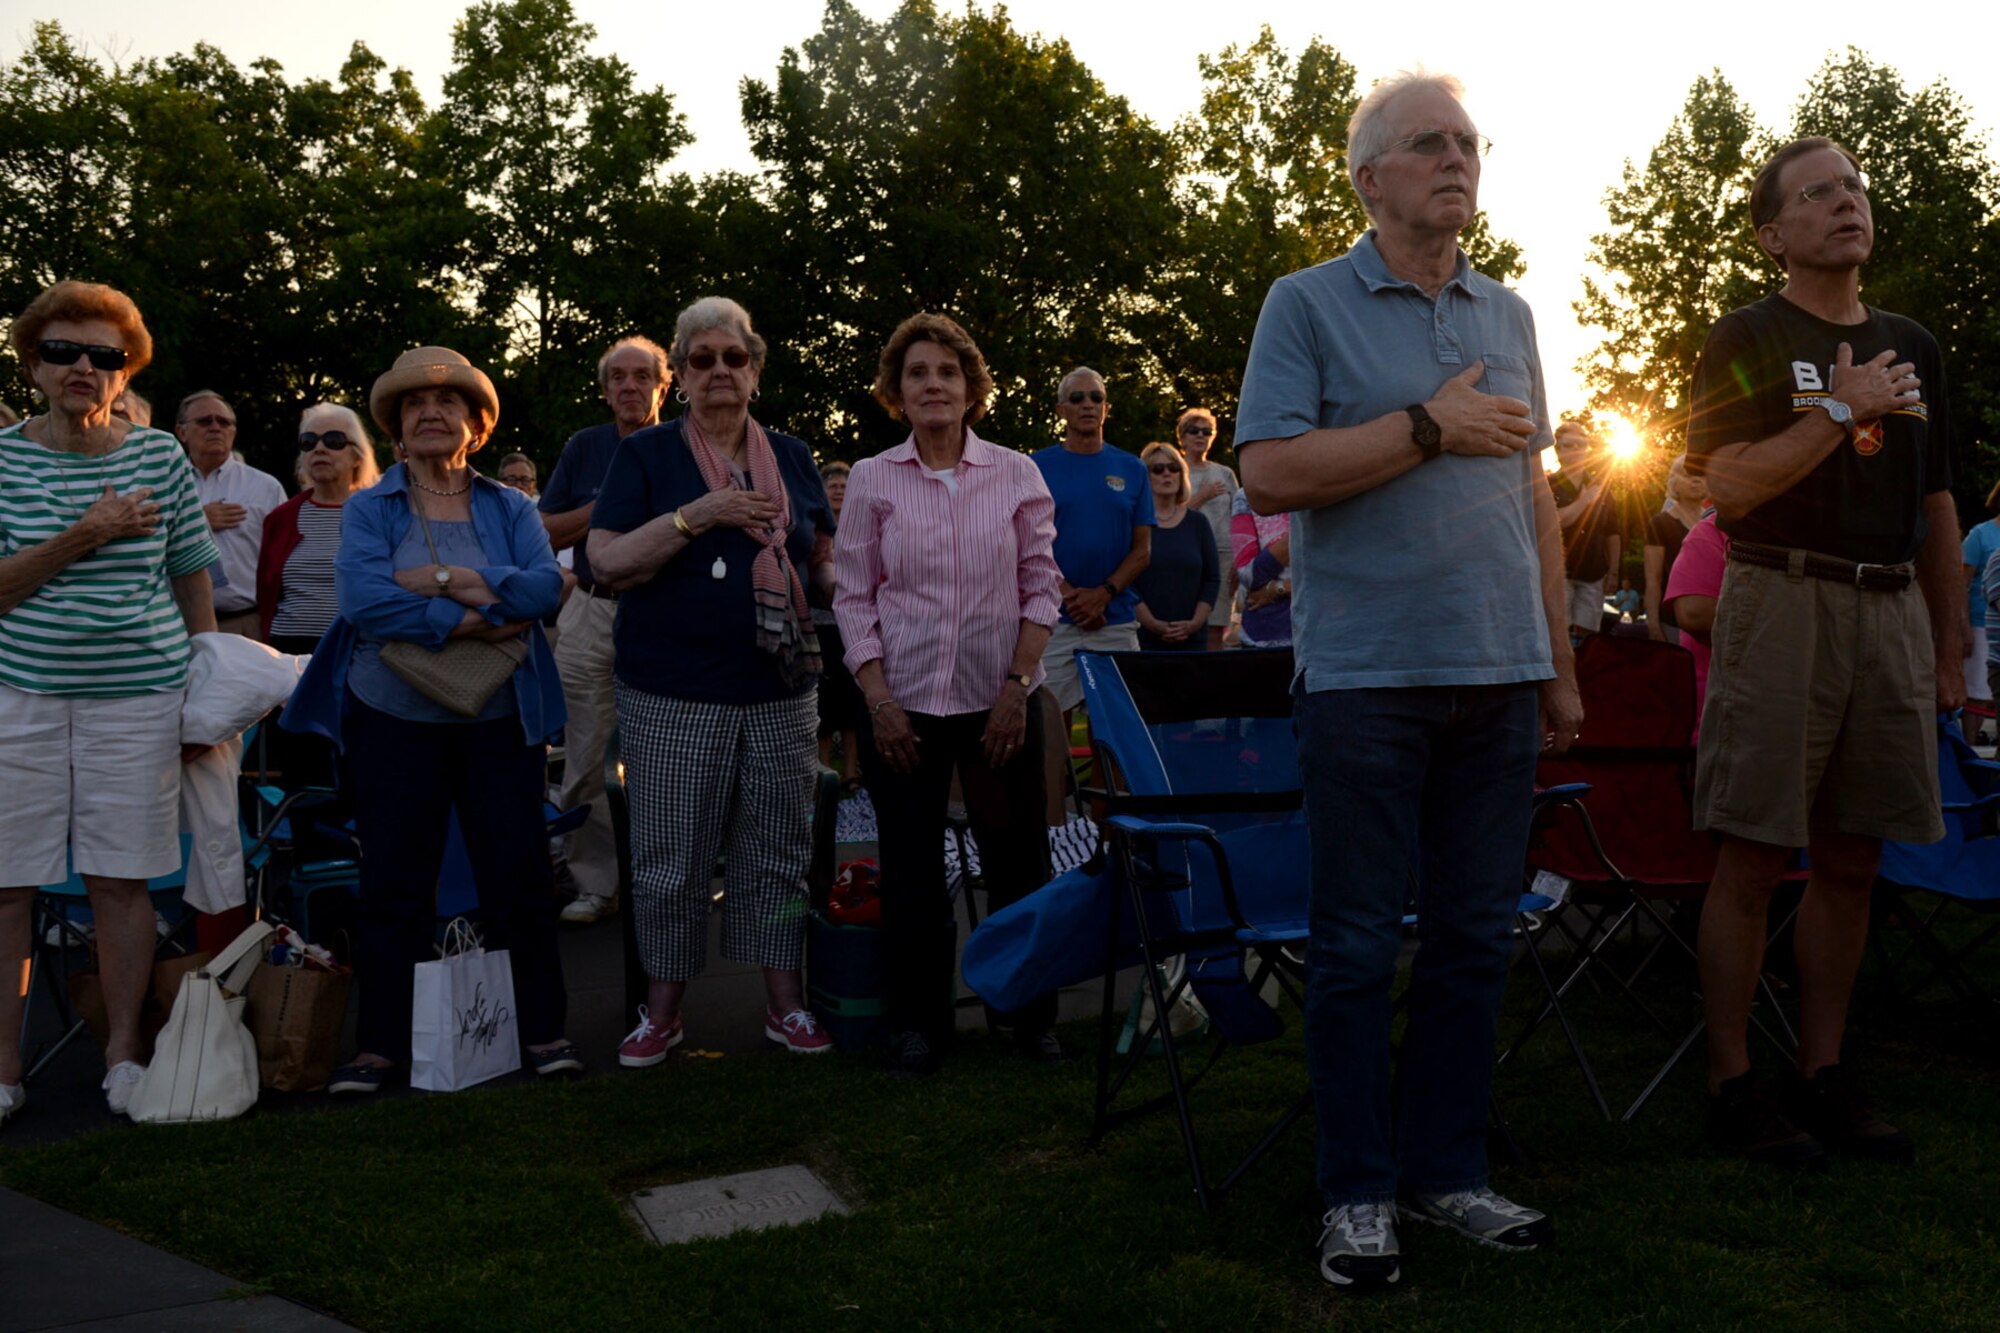 Audience members stand while the U.S. Air Force Band performs the National Anthem at the Air Force Memorial in Arlington, Va., June 17, 2016. During the performance, the Macy’s Band Selection Committee announced the United States Air Force Band and Honor Guard will represent the Air Force and perform in New York City in the 2017 Macy’s Thanksgiving Day Parade. (U.S. Air Force photo/Tech. Sgt. Matt Davis)